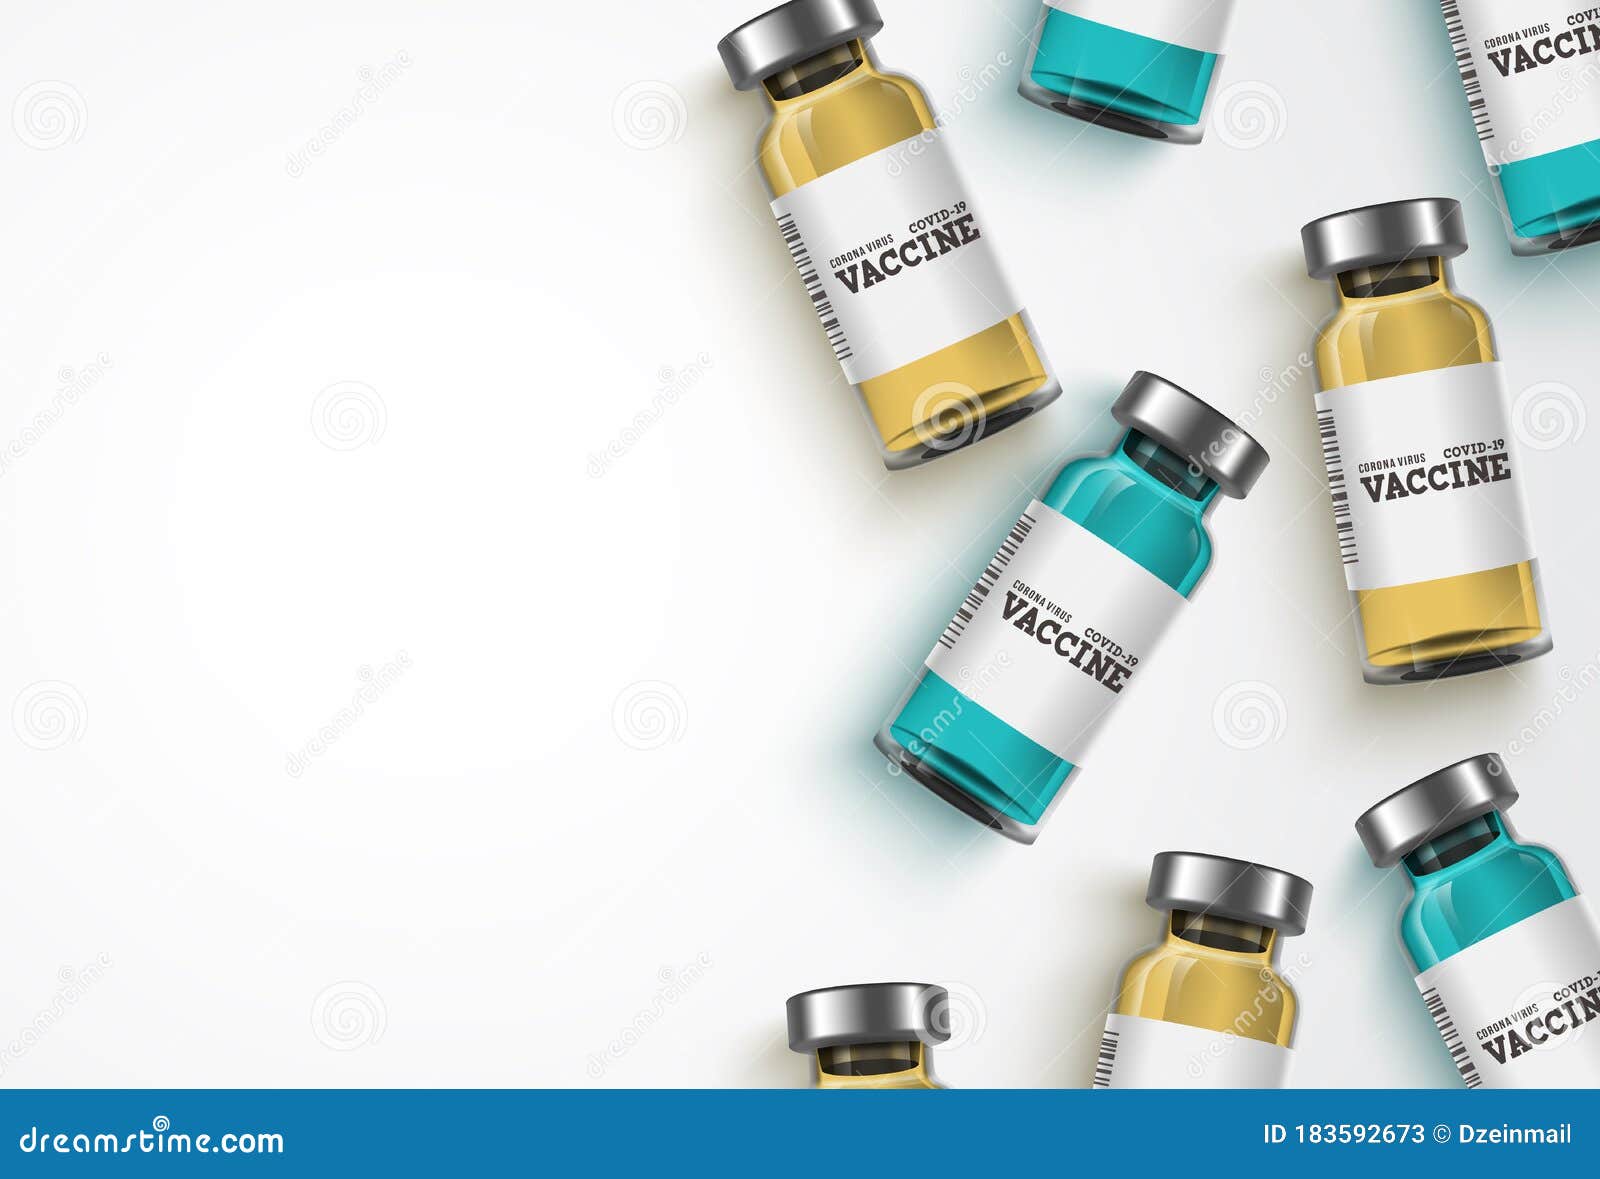 vaccine bottle for covid-19  background template. covid19 vaccine bottles